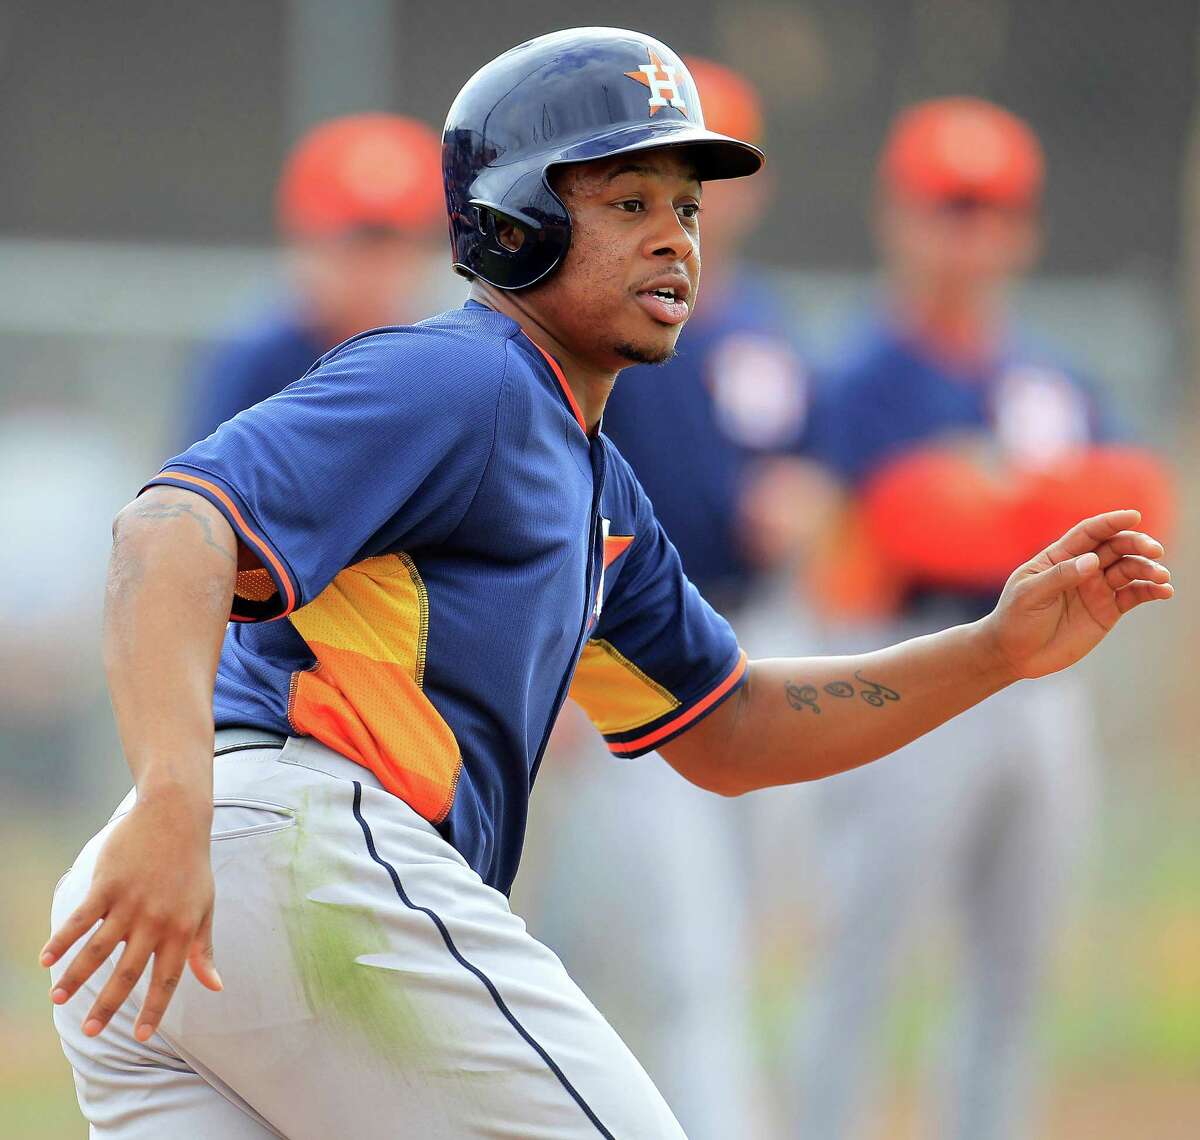 Former Cardinal Adron Chambers is trying to stick with the Astros after turning to baseball when his college football career came to an abrupt end.